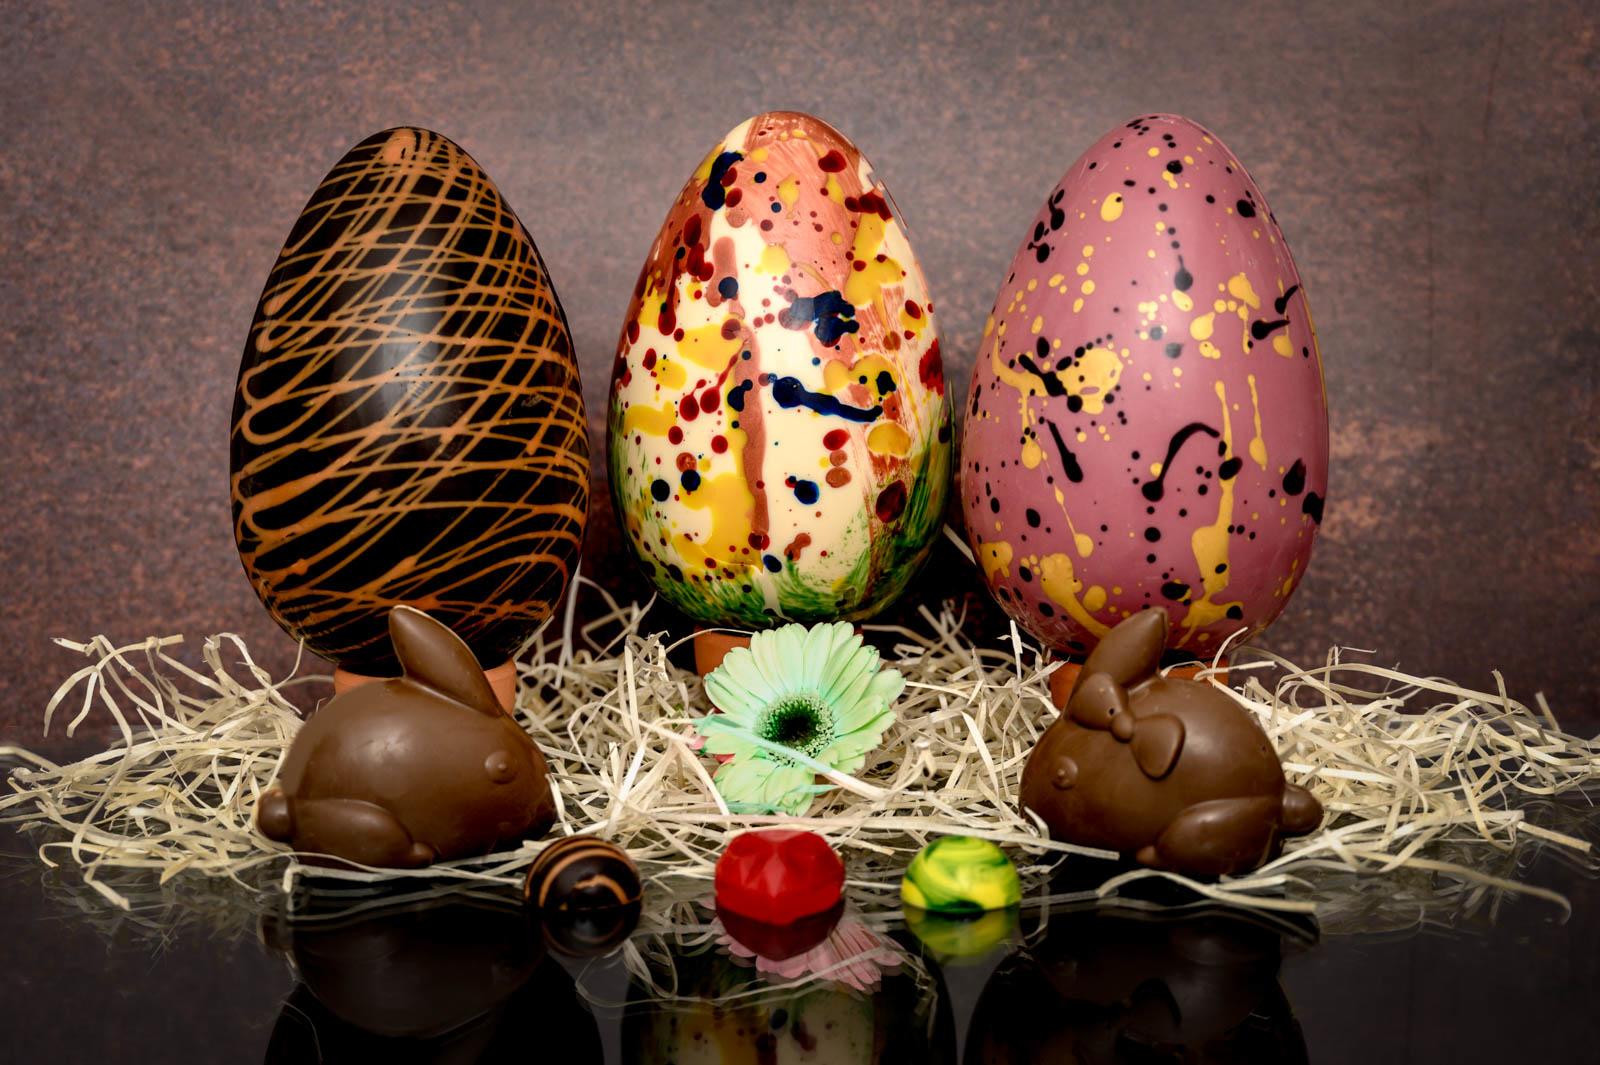 Image shows three chocolate easter eggs side by side on a bed of straw. One is dark chocolate, one white chocolate with splashes of colour and the other is pink with yellow and black marbling. In front of the eggs are two chocolate rabbits with a flower positioned in the middle. In front are three different handmade chocolates, one dark chocolate, one coloured red and the final one is yellow and green.